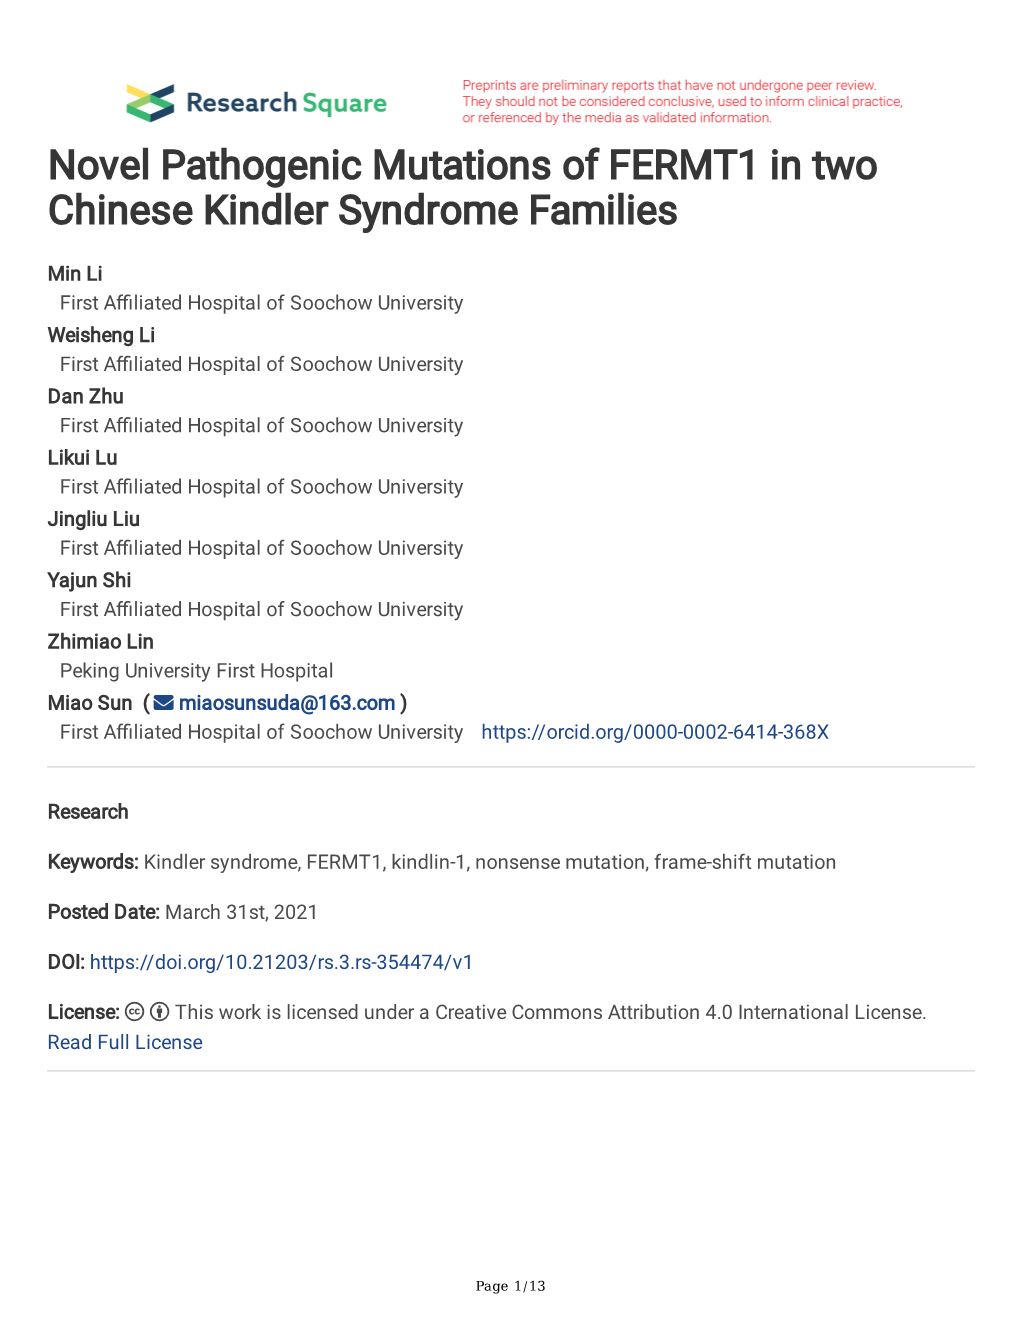 Novel Pathogenic Mutations of FERMT1 in Two Chinese Kindler Syndrome Families